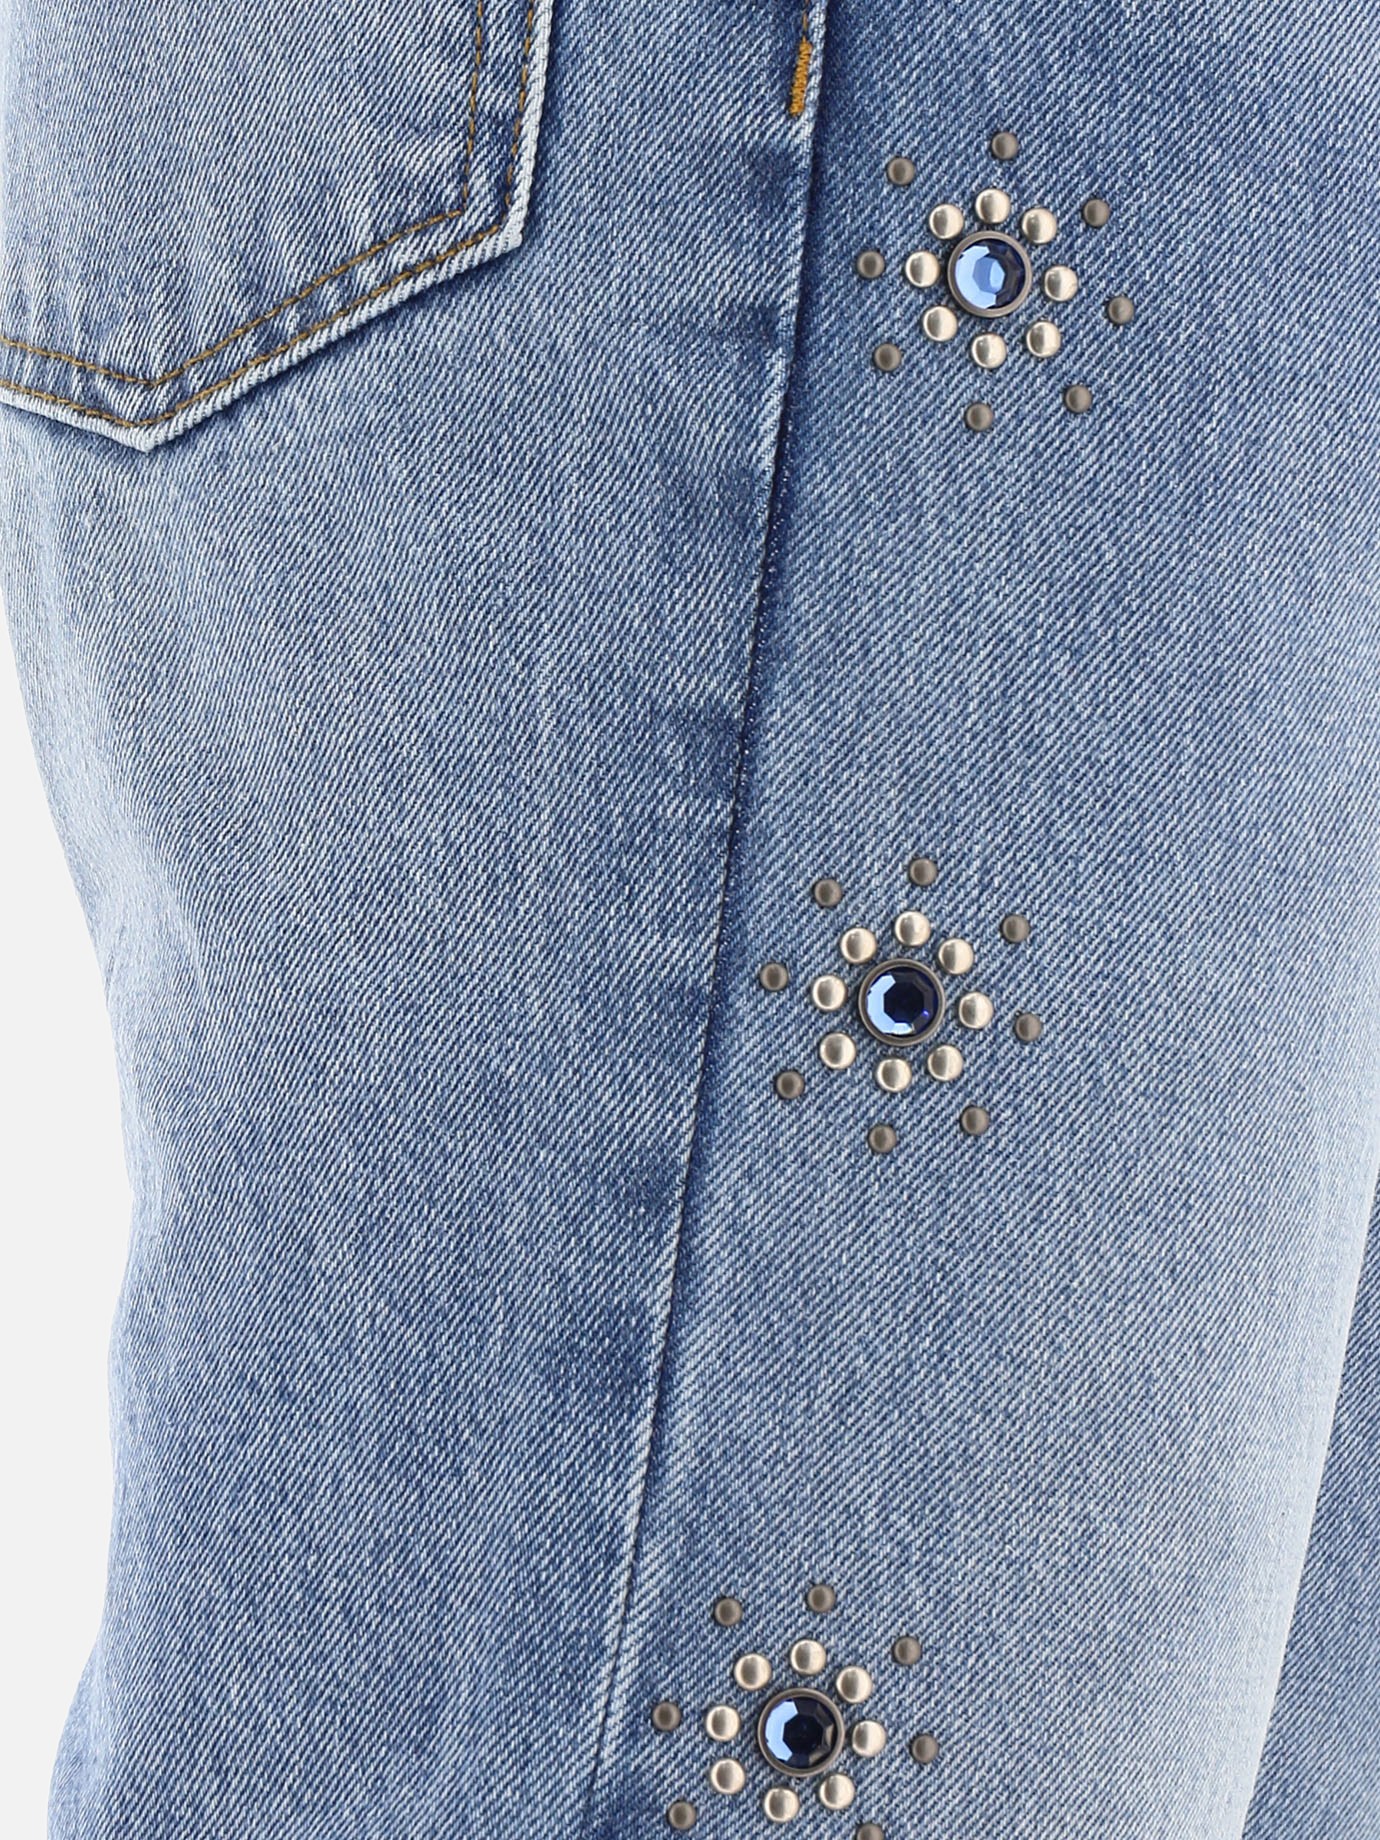 Studded jeans by RE/DONE